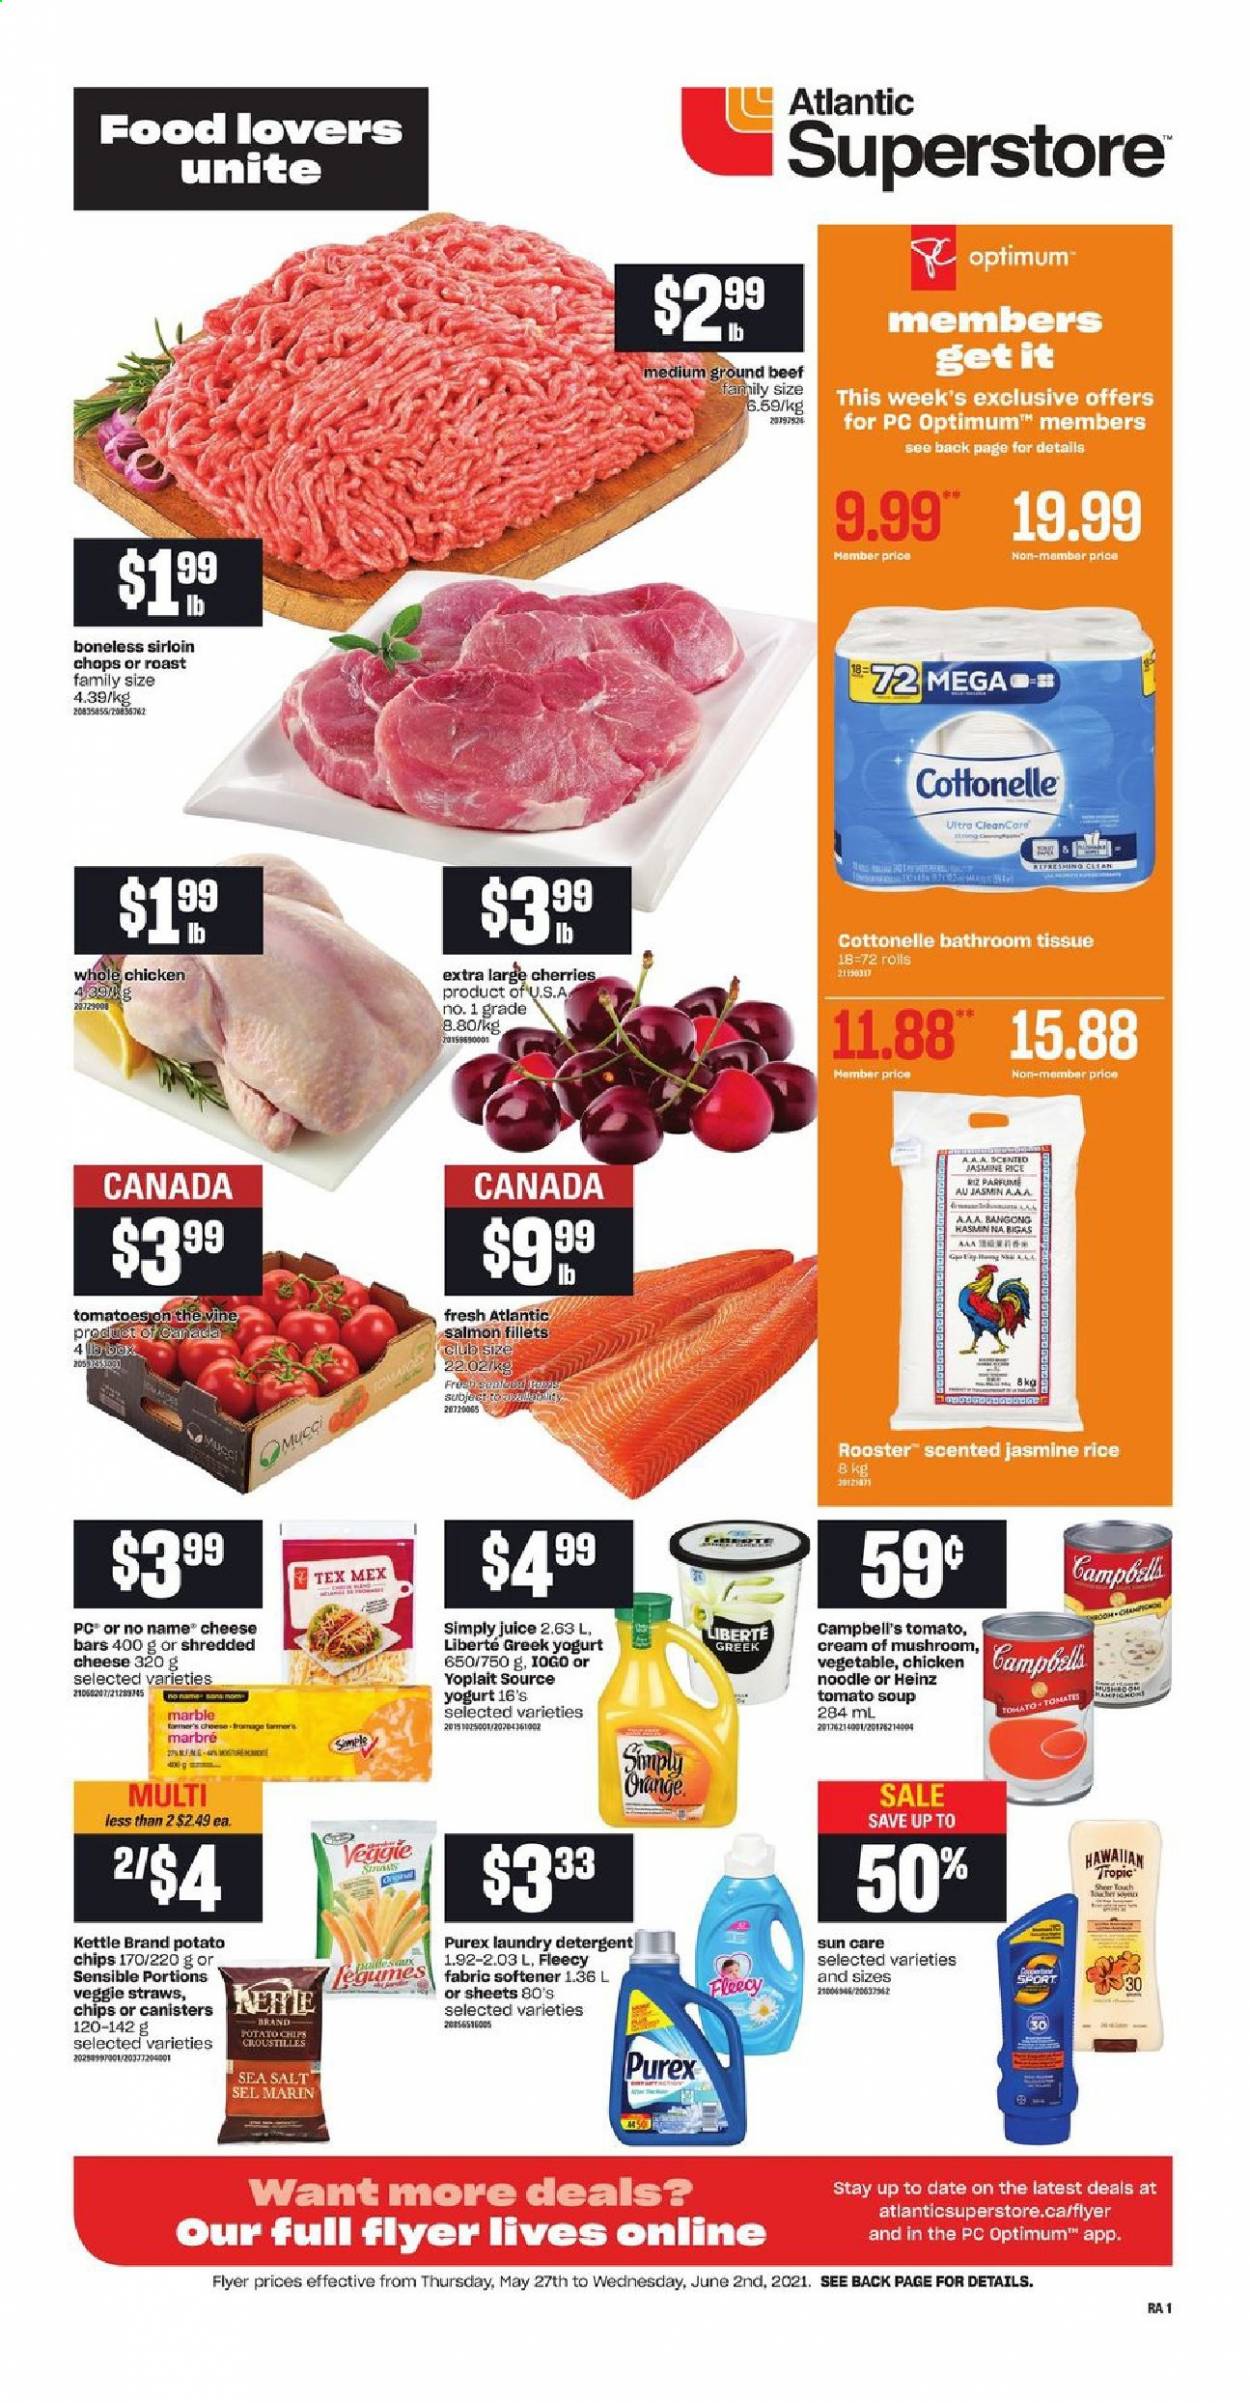 thumbnail - Atlantic Superstore Flyer - May 27, 2021 - June 02, 2021 - Sales products - tomatoes, cherries, salmon, salmon fillet, No Name, Campbell's, tomato soup, soup, noodles, shredded cheese, greek yoghurt, yoghurt, Yoplait, potato chips, Veggie Straws, Heinz, rice, jasmine rice, juice, whole chicken, chicken, beef meat, ground beef, bath tissue, Cottonelle, fabric softener, laundry detergent, Purex, Optimum, chips. Page 1.